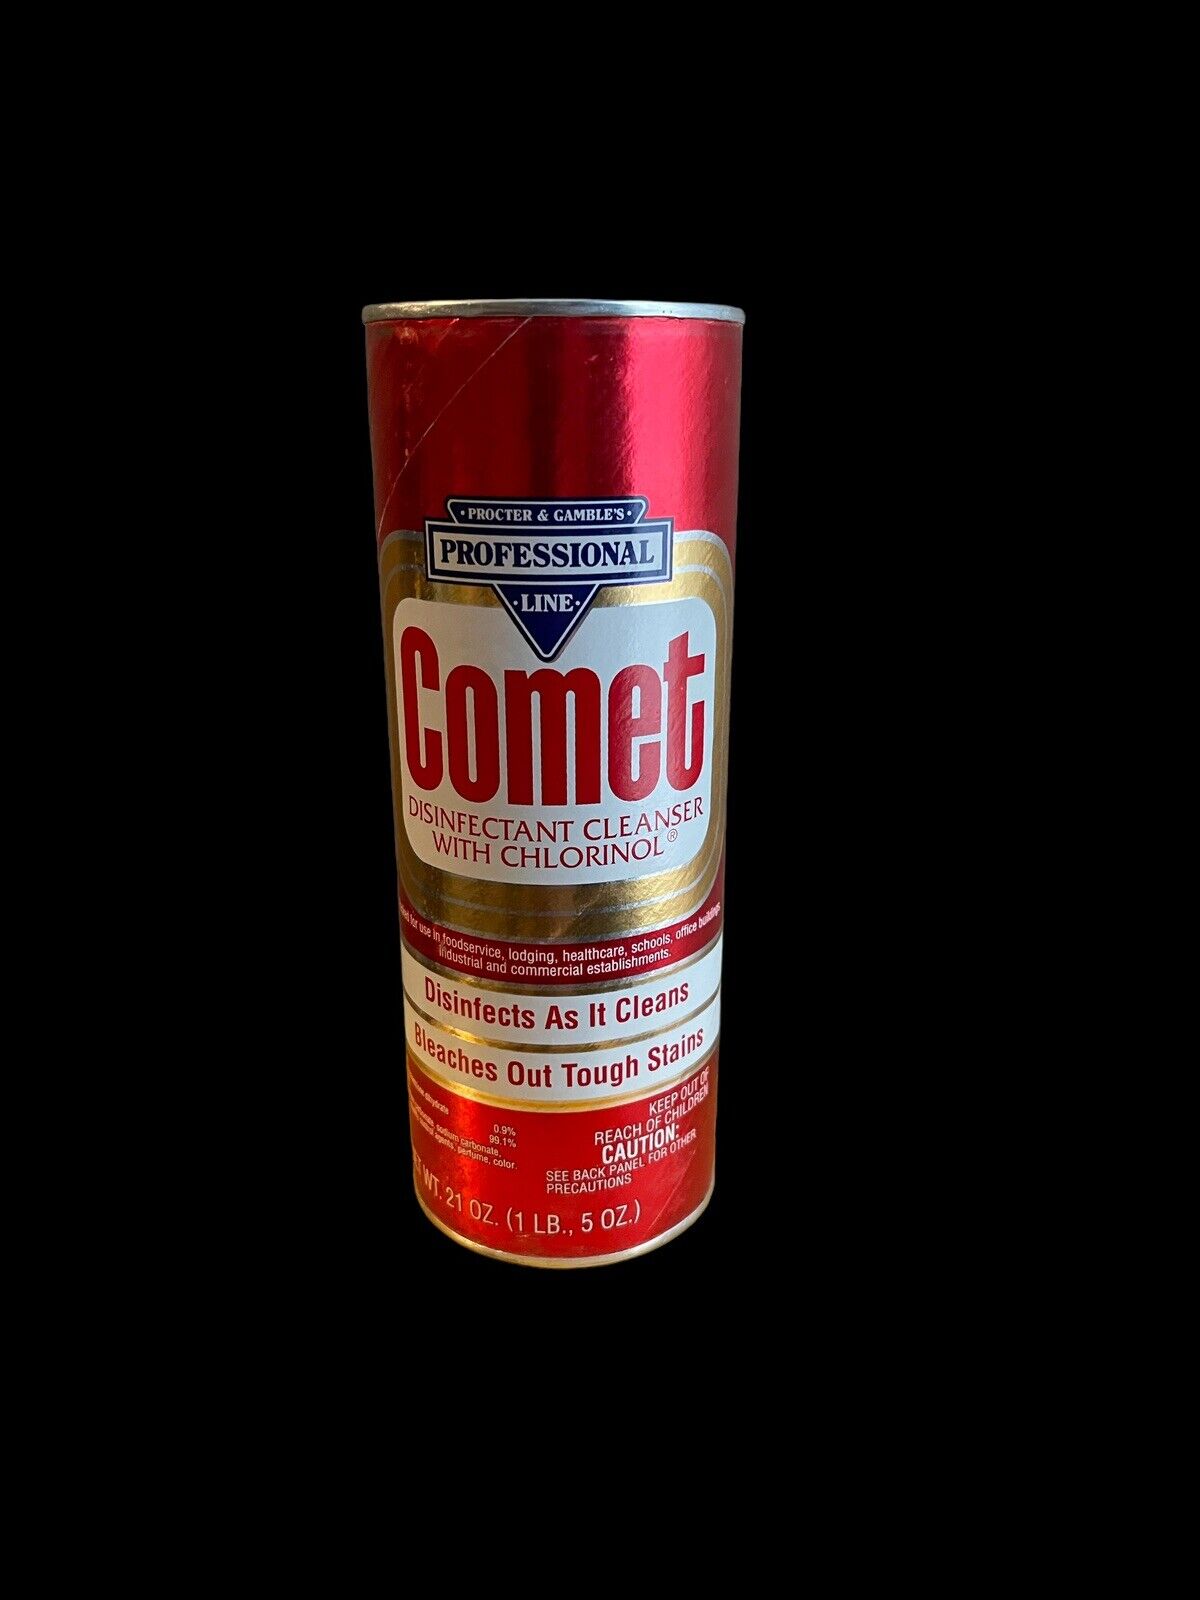 New Sealed 16 oz Comet Cleanser Cleaner Professional Red Can Prop Display VTG